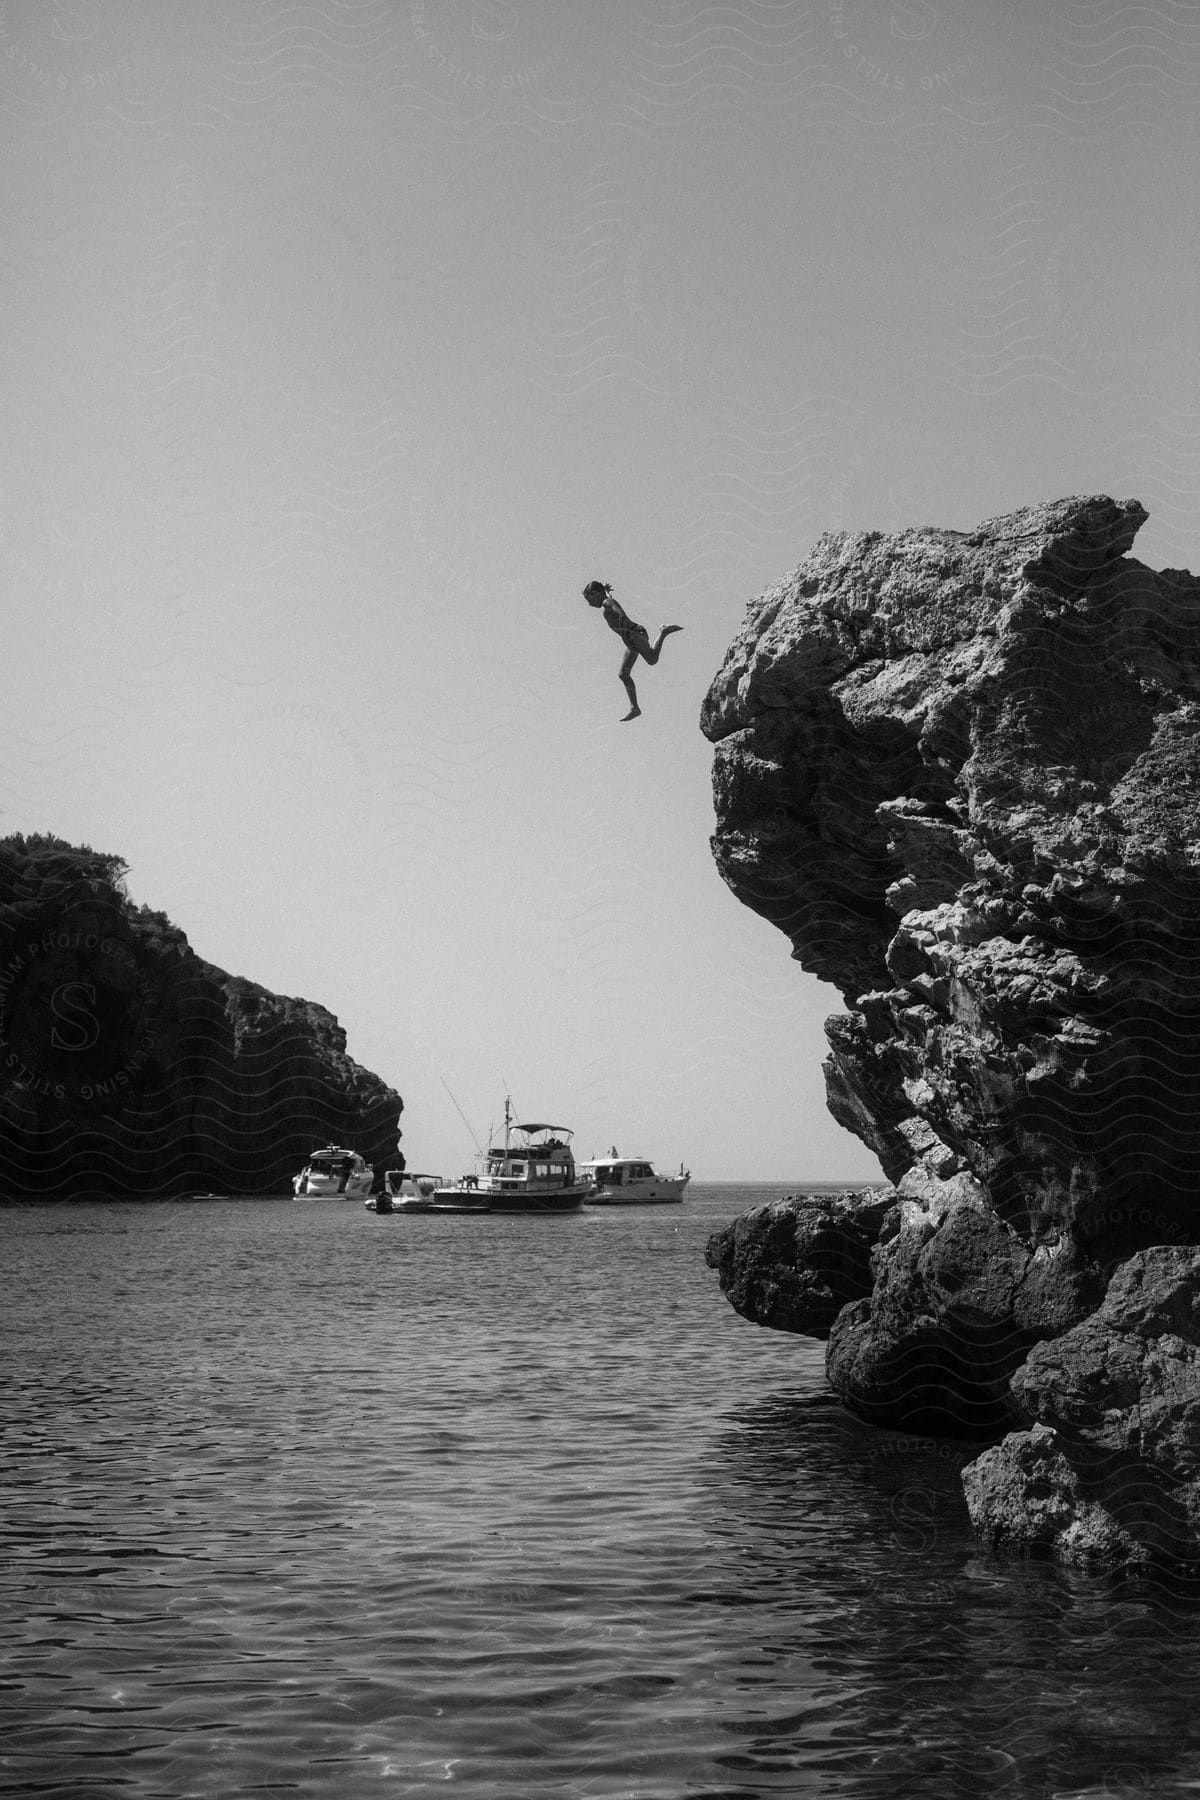 A person jumping from a mountain into an ocean